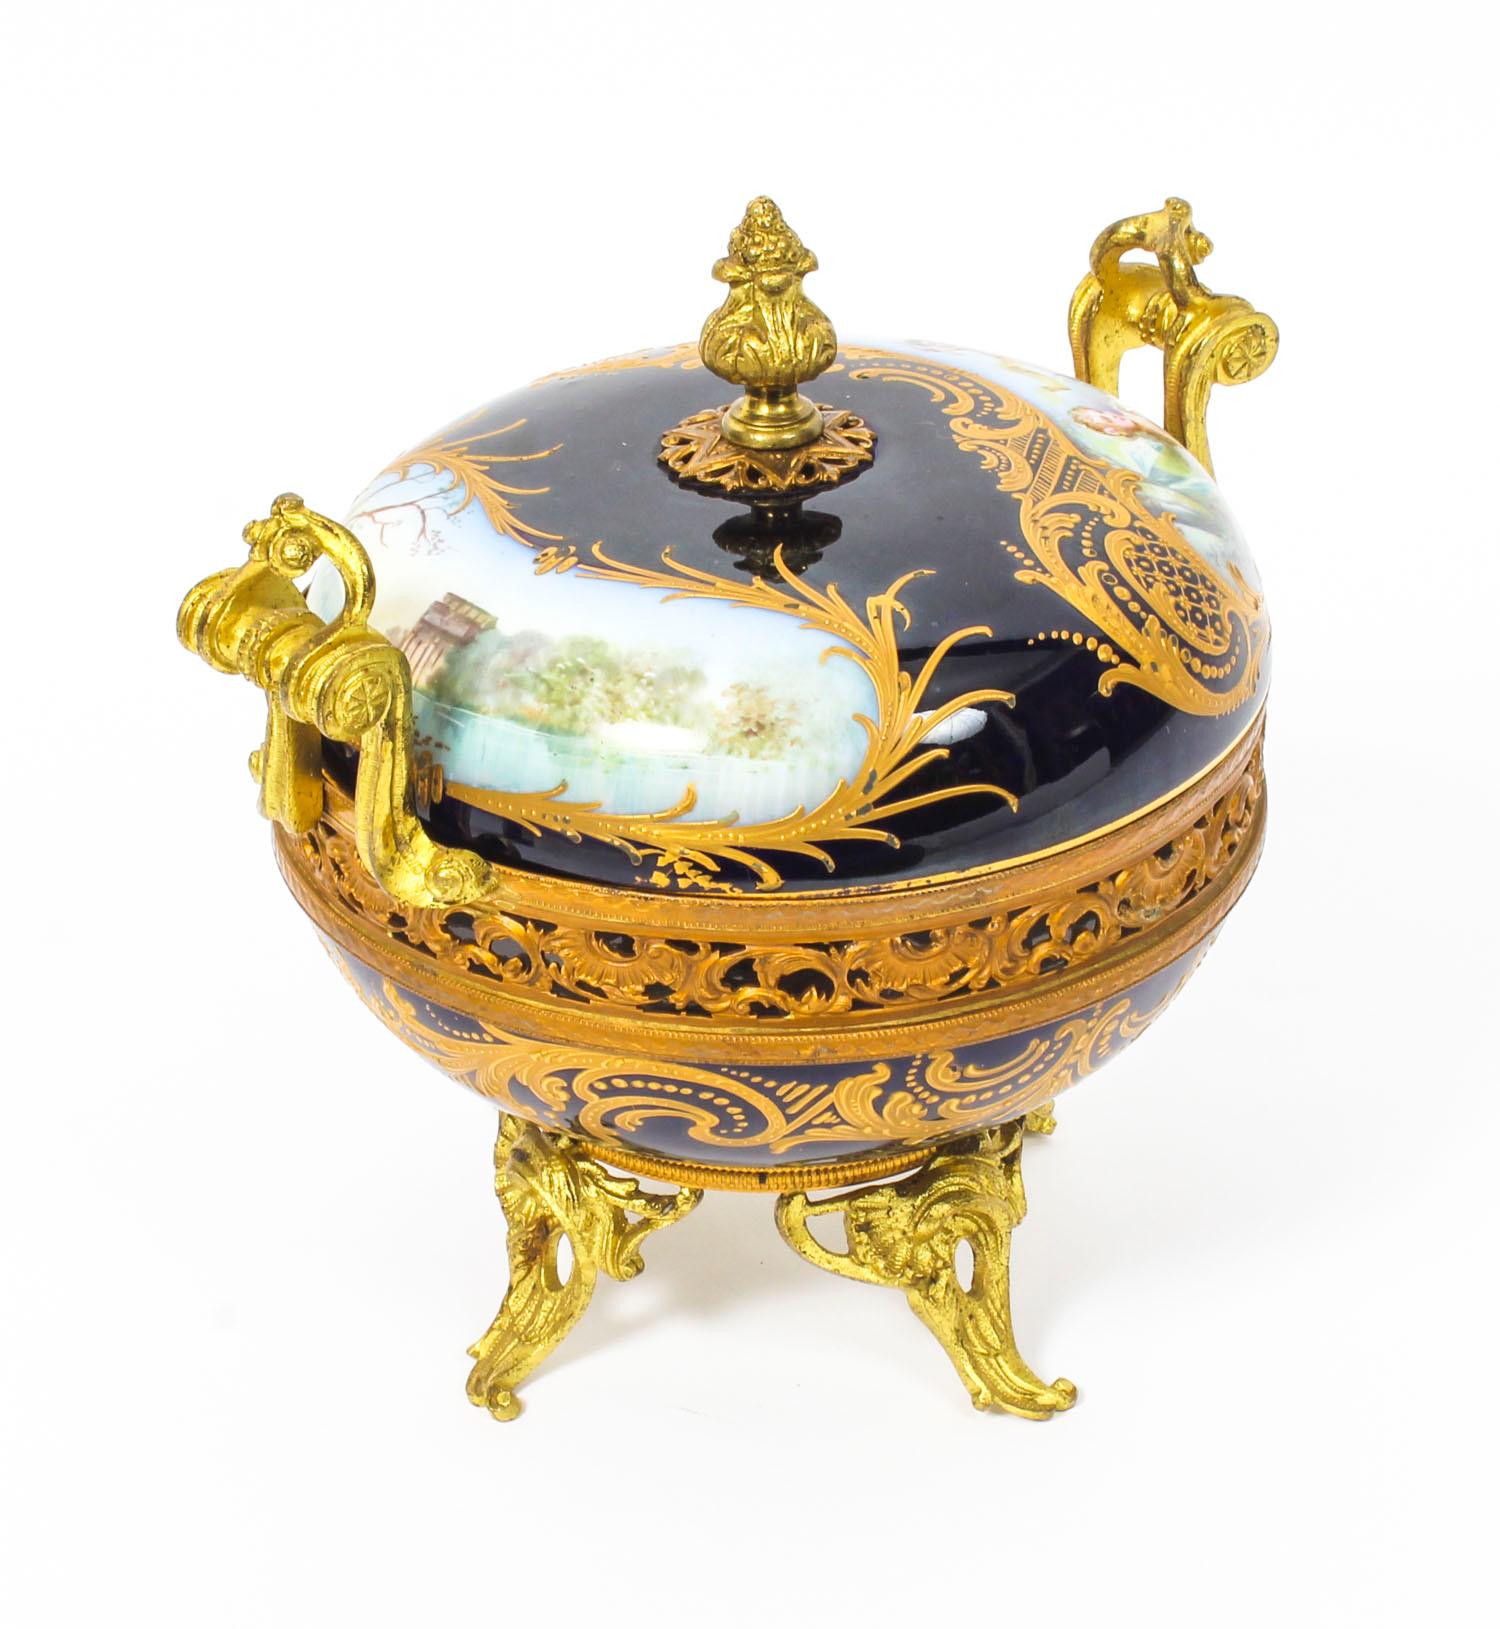 A 19th century Louis Philippe serves porcelain Pot-Pourri decorated with a lady and cherub, having pierced ormolu mounts and feet; fully marked inside the lid 20 cm high, 18 cm high, 17cm diameter.

This is a beautiful French 19th century Louis